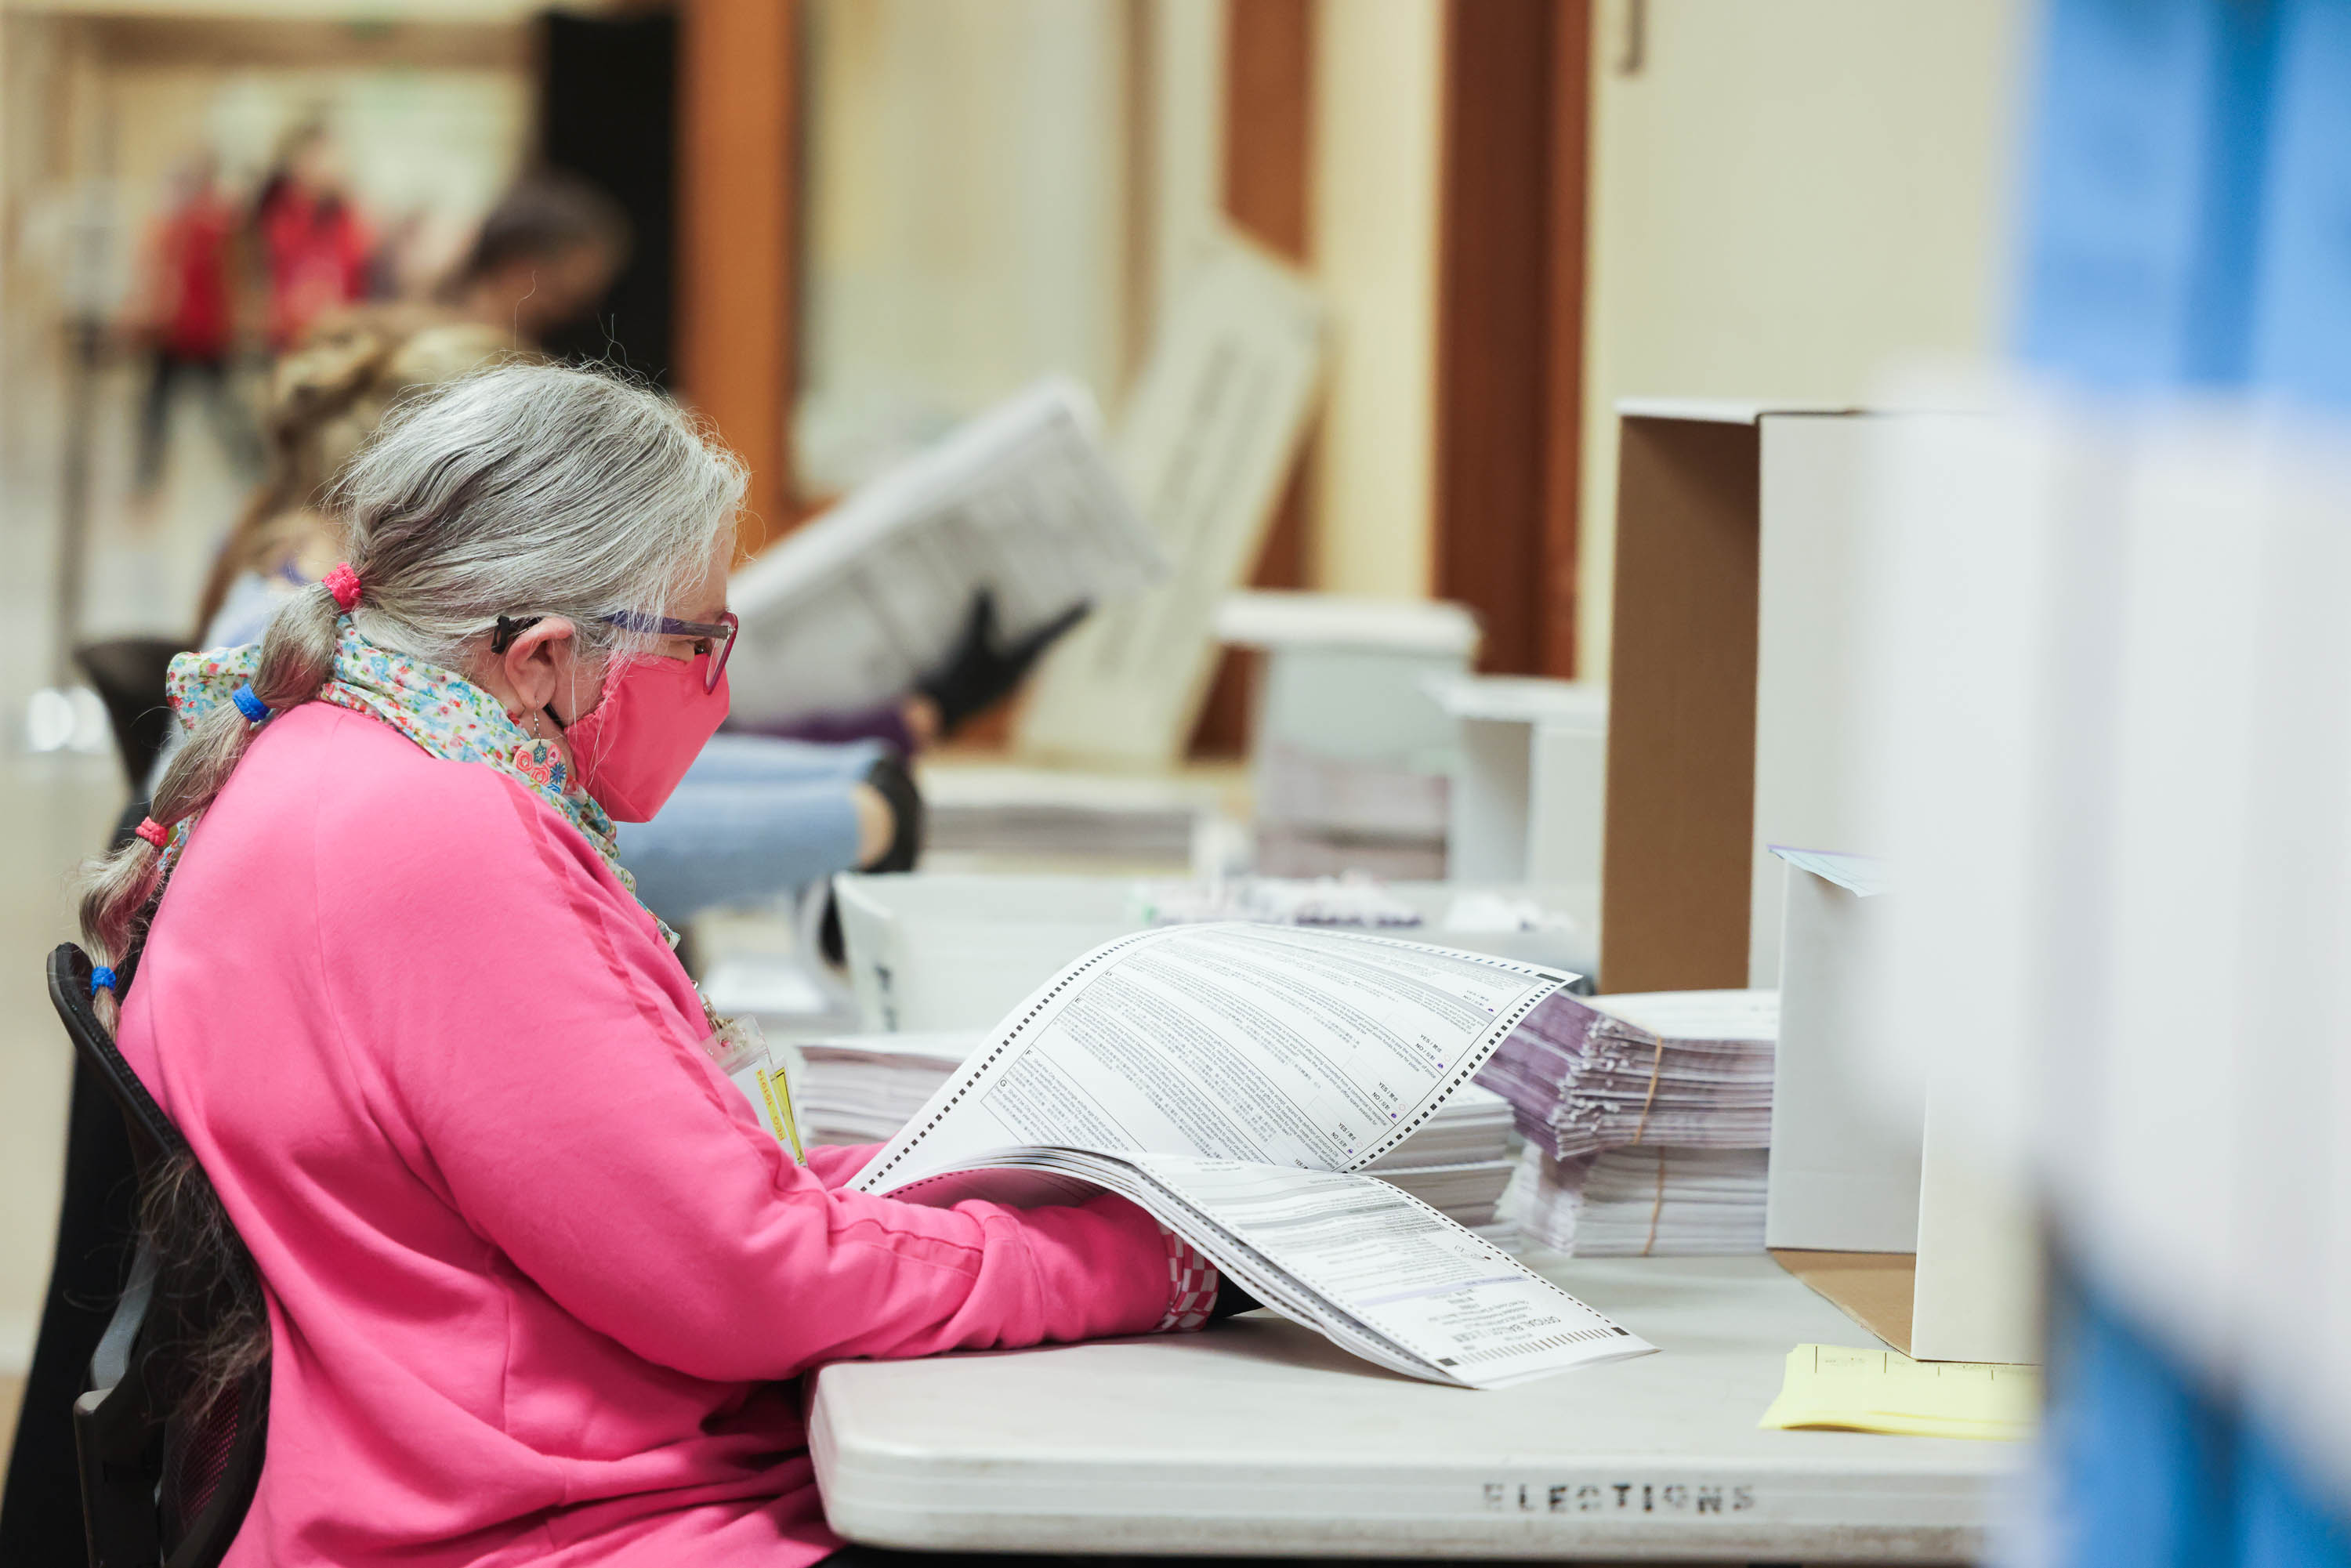 A person in a pink outfit and a face mask is examining papers in a room with labeled &quot;Elections&quot; bins.